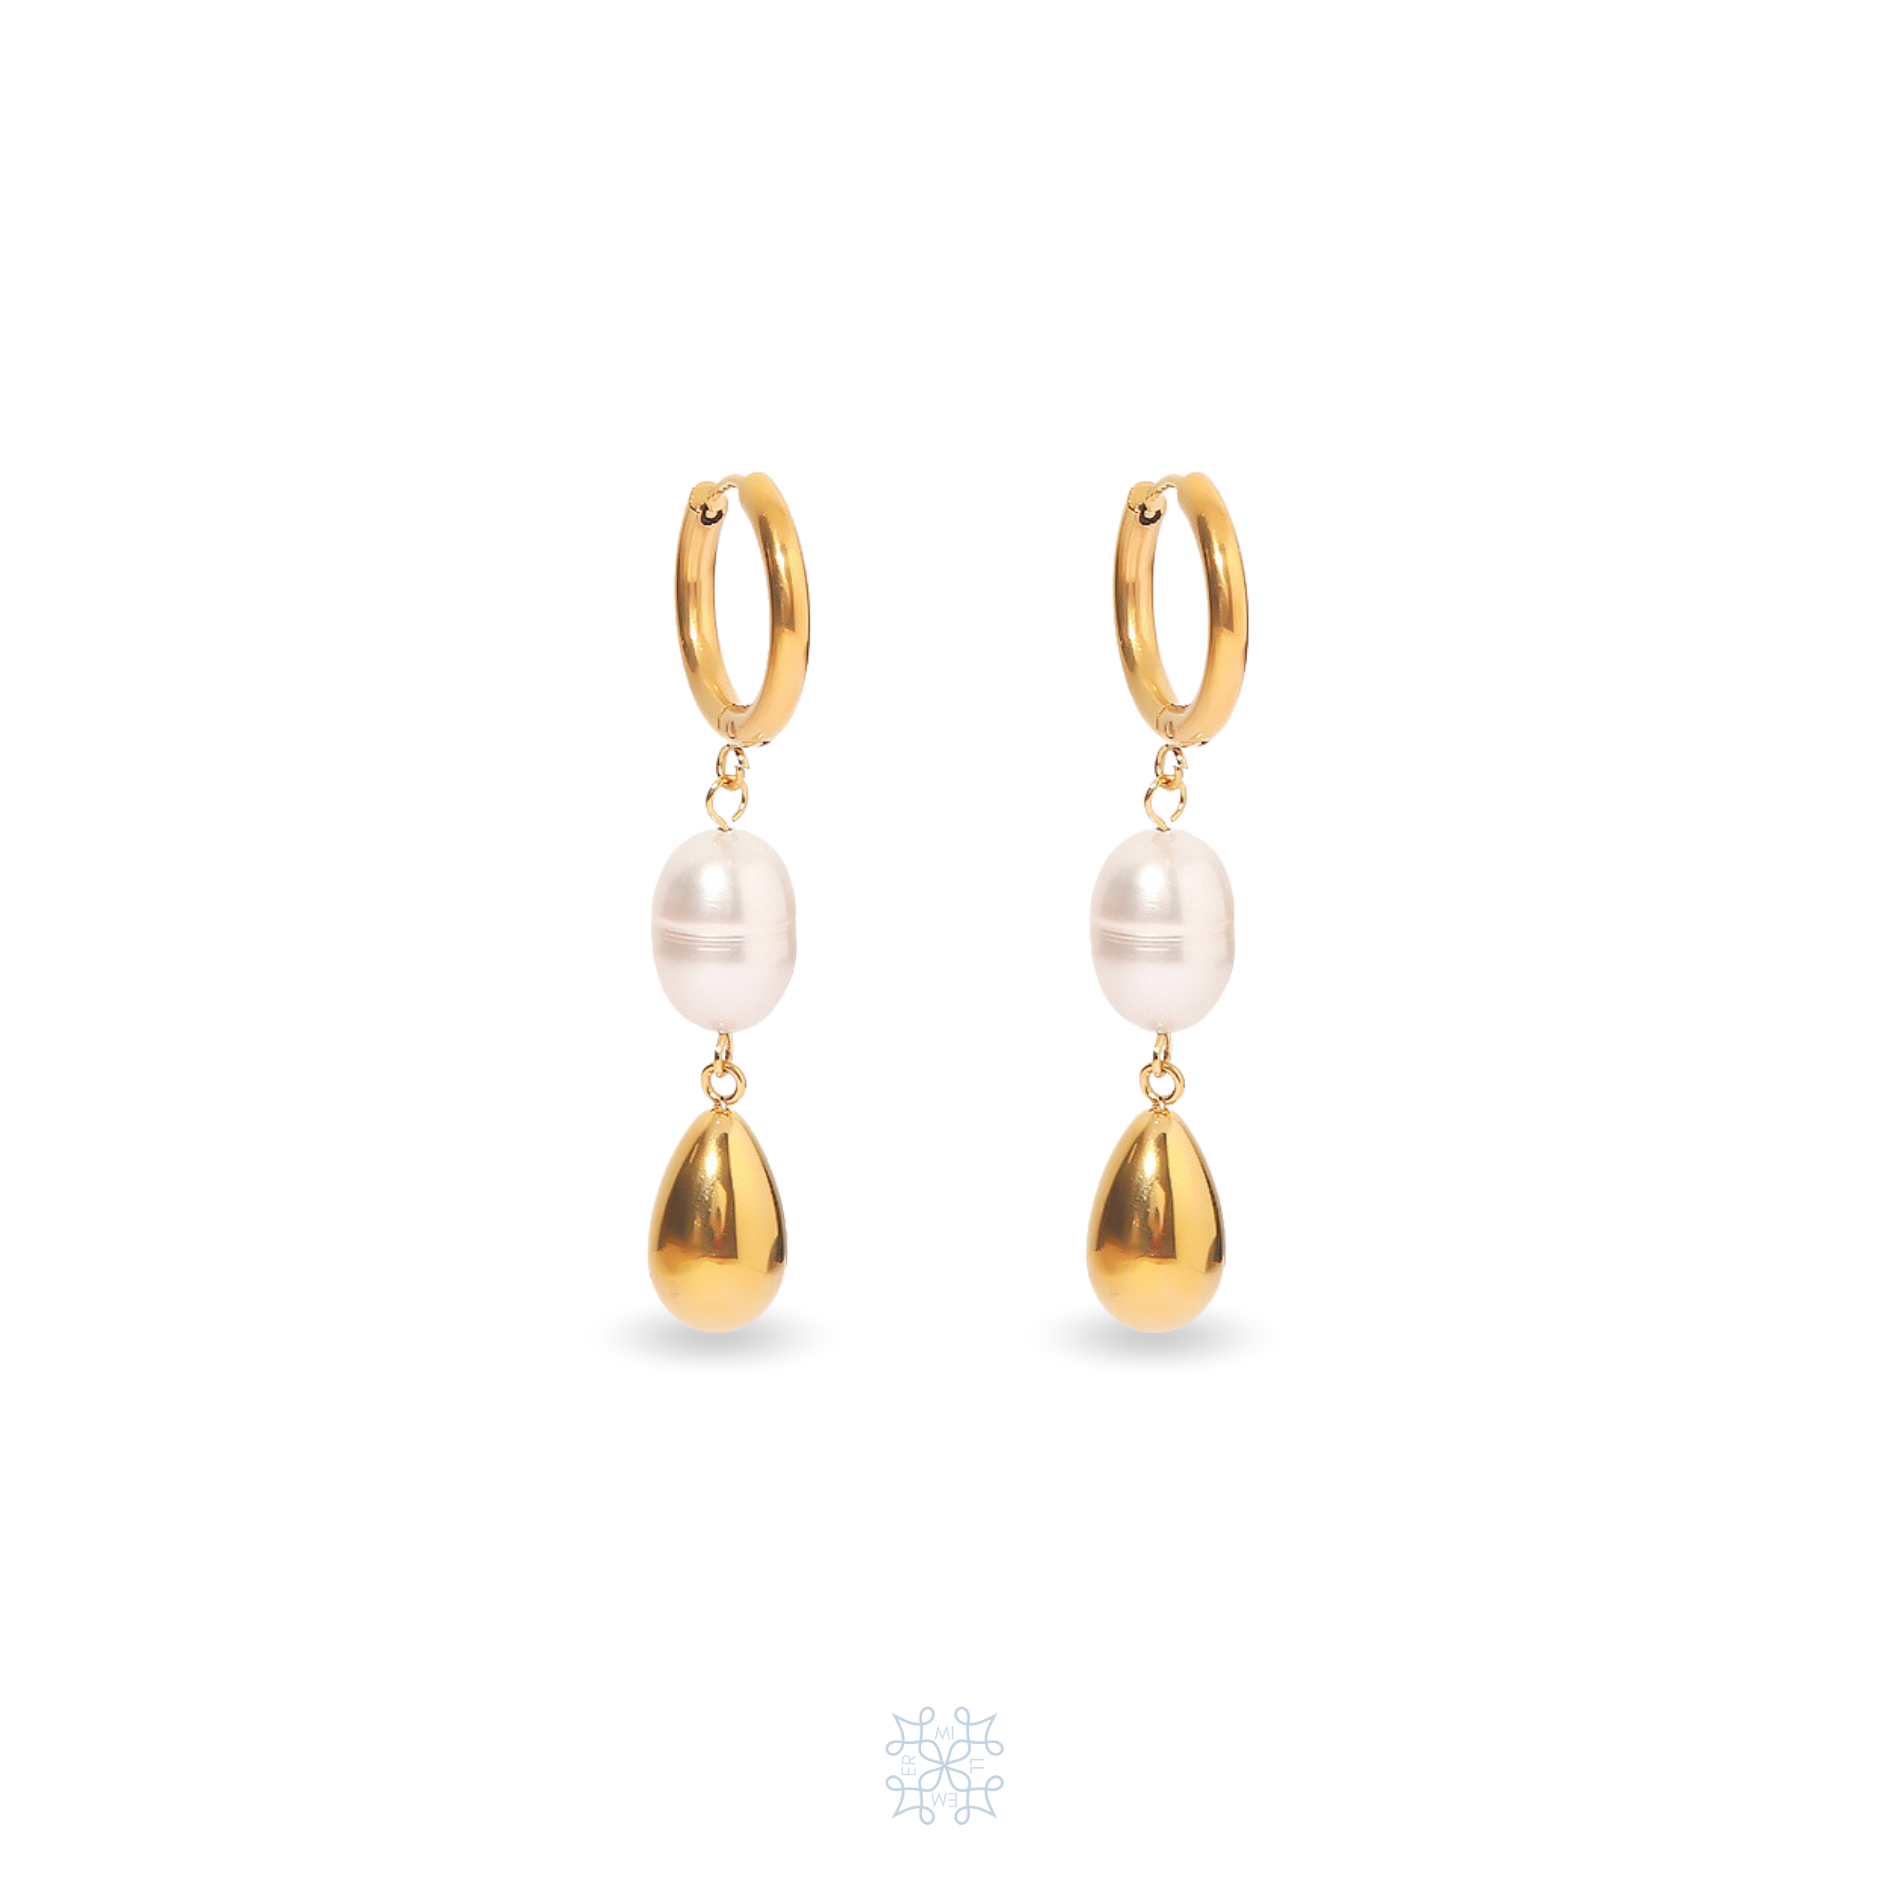 Gold Pearl Drop Earrings. Golden Drops and White Pearls attached in an elegant gold hoop. The gold drops looks like water drops shape.